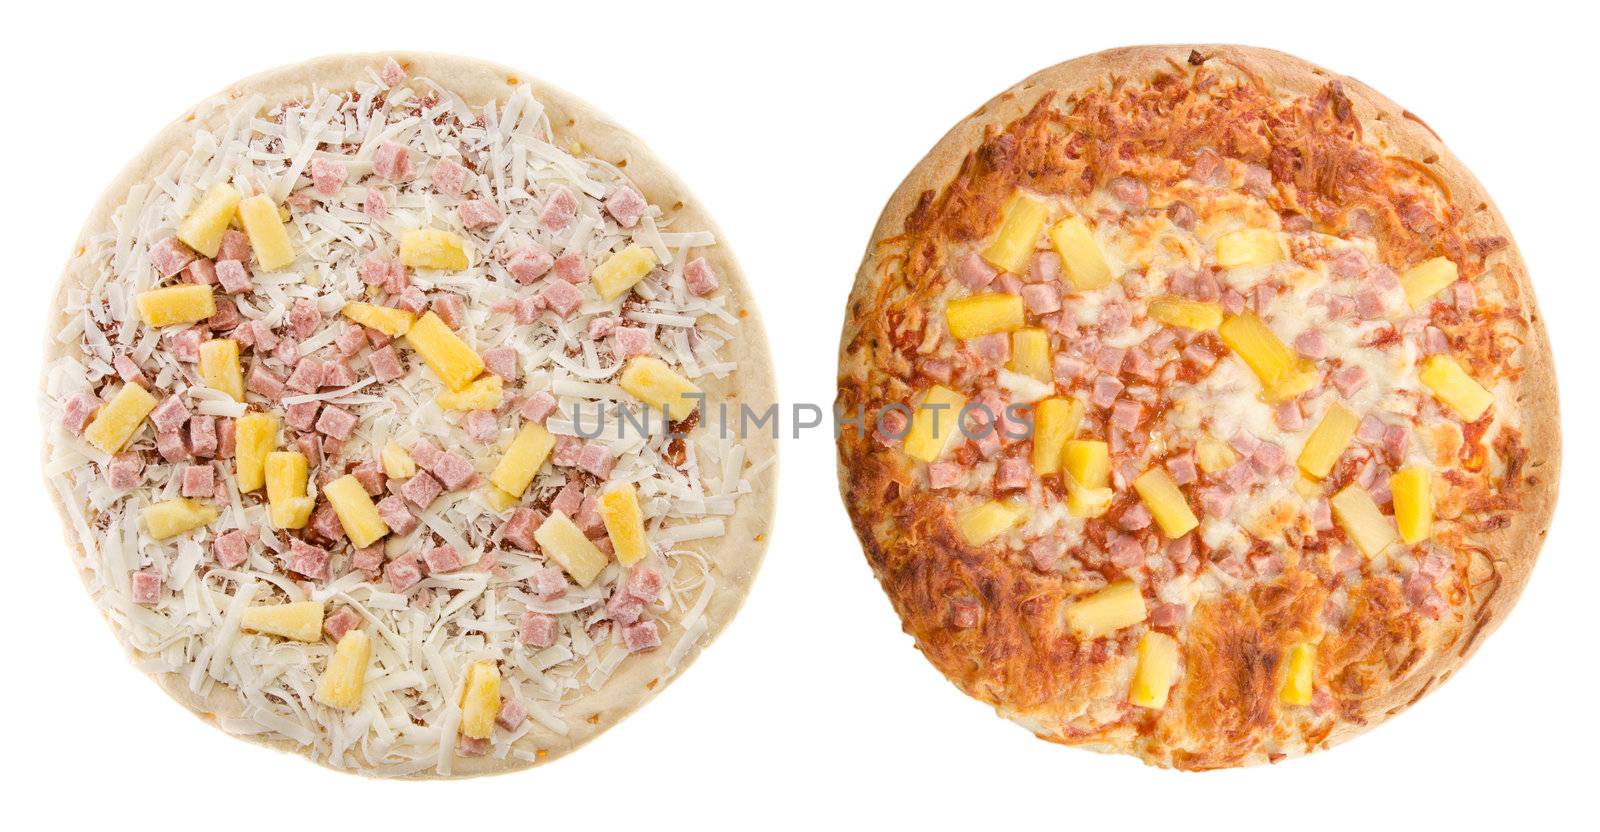 Comparison of a cooked and uncooked hawaiian pizza, isolated on a white background.